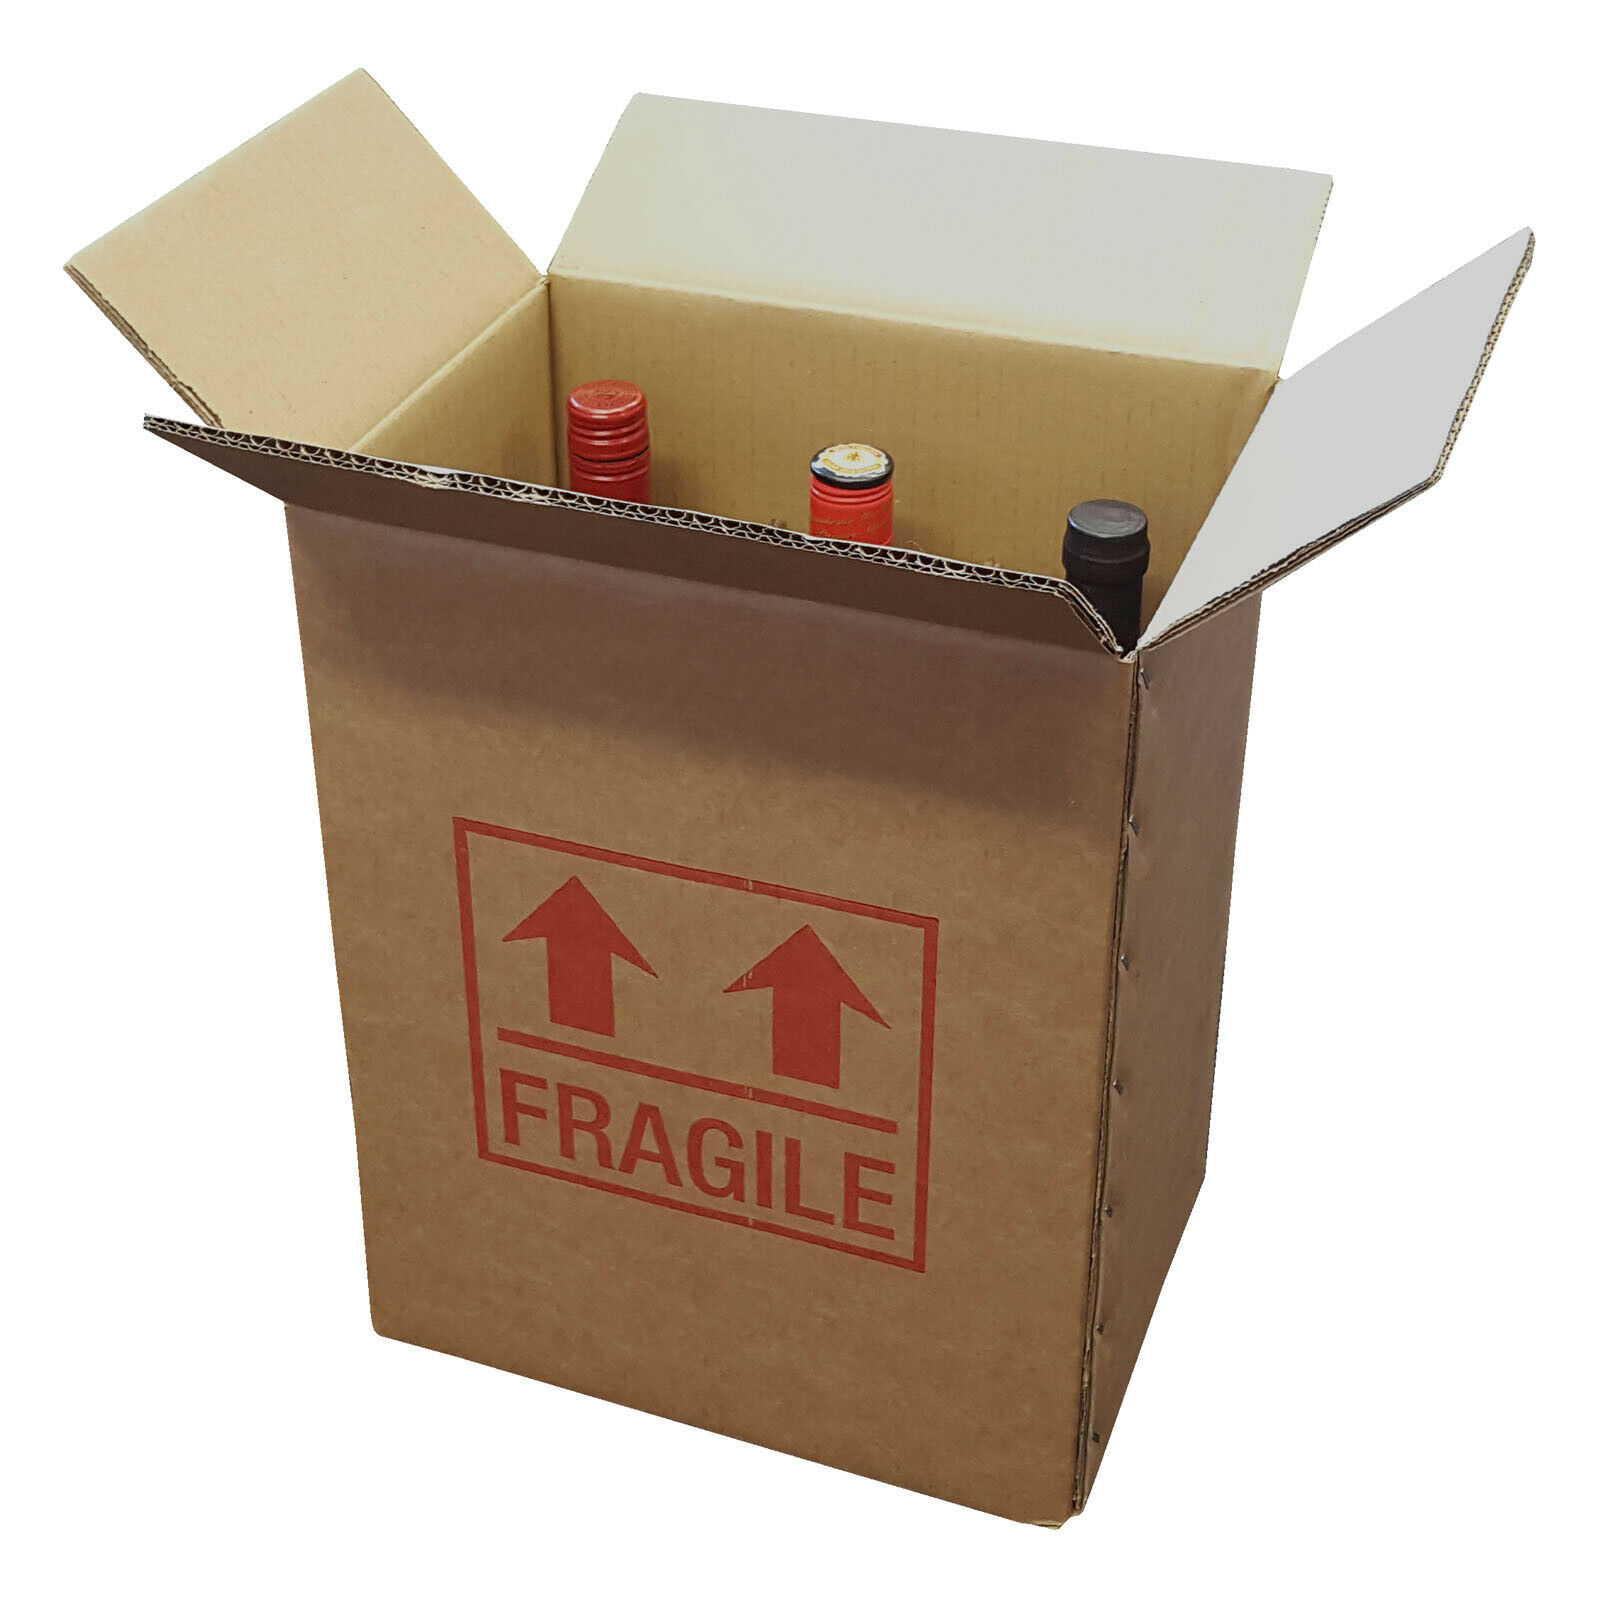 5 Strong Cardboard 6 Bottle Wine Boxes 275mm x 190mm x 335mm Printed Fragile